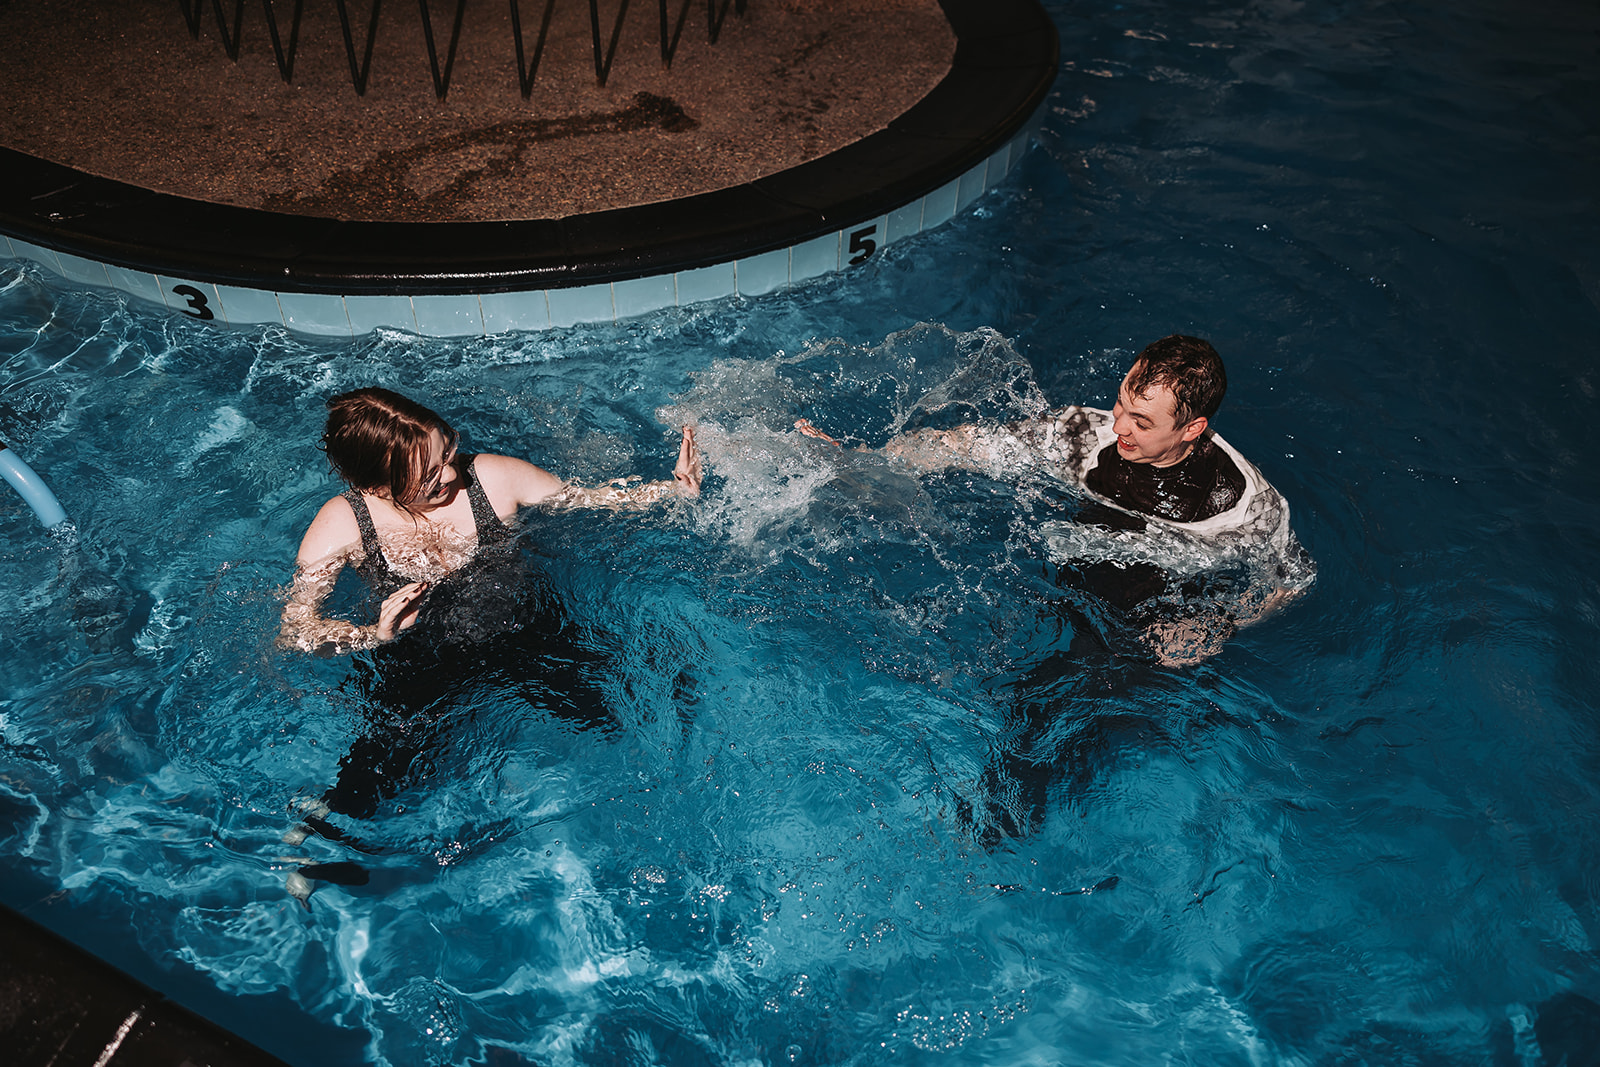 creative engagement session ideas at a pool